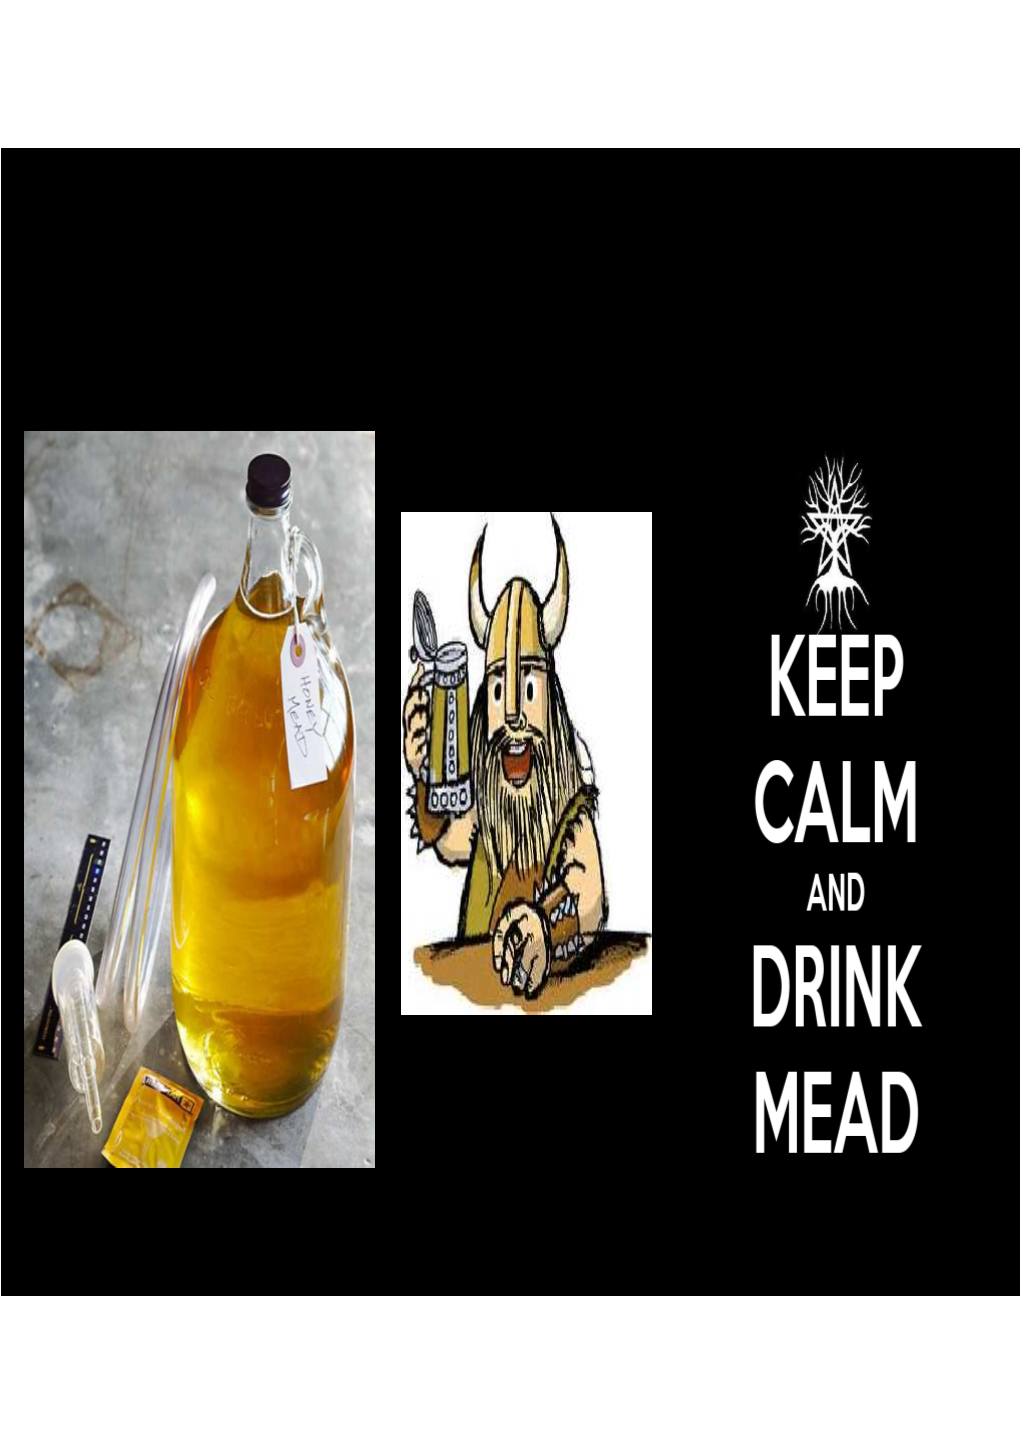 Making Mead 101 by Todd Donnelly